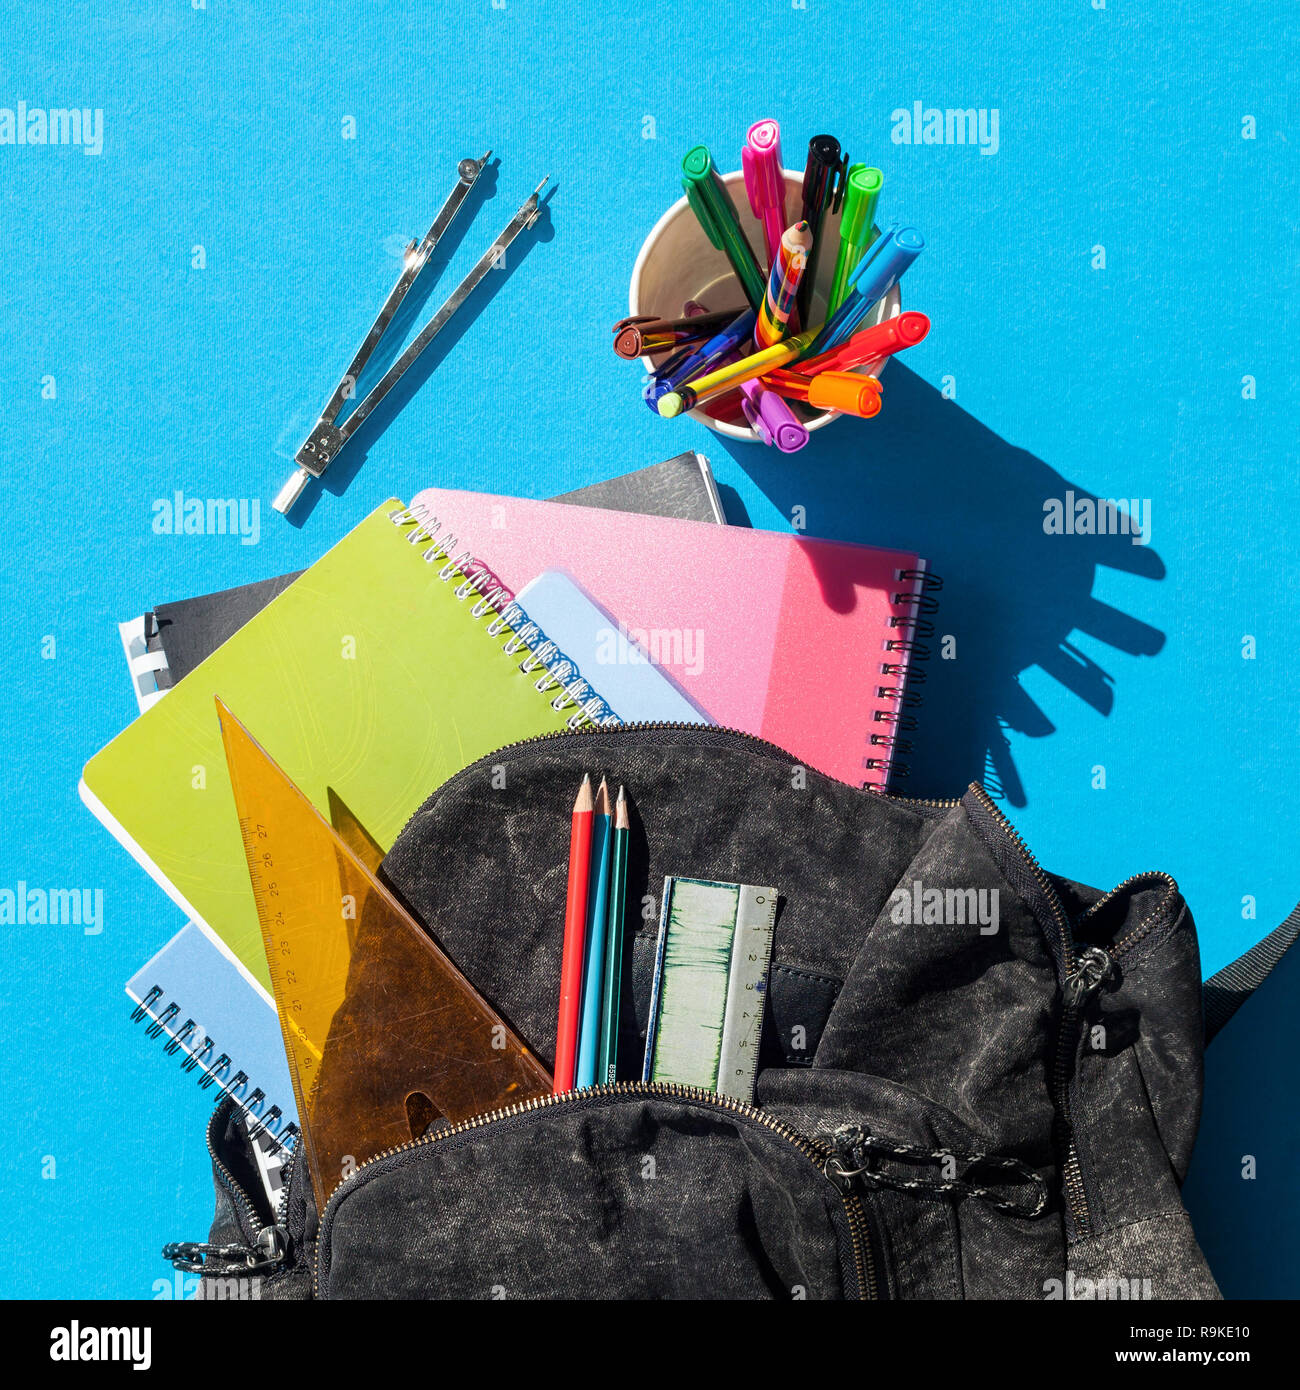 Square format of an overview of a schoolbag contents, blue background Stock Photo